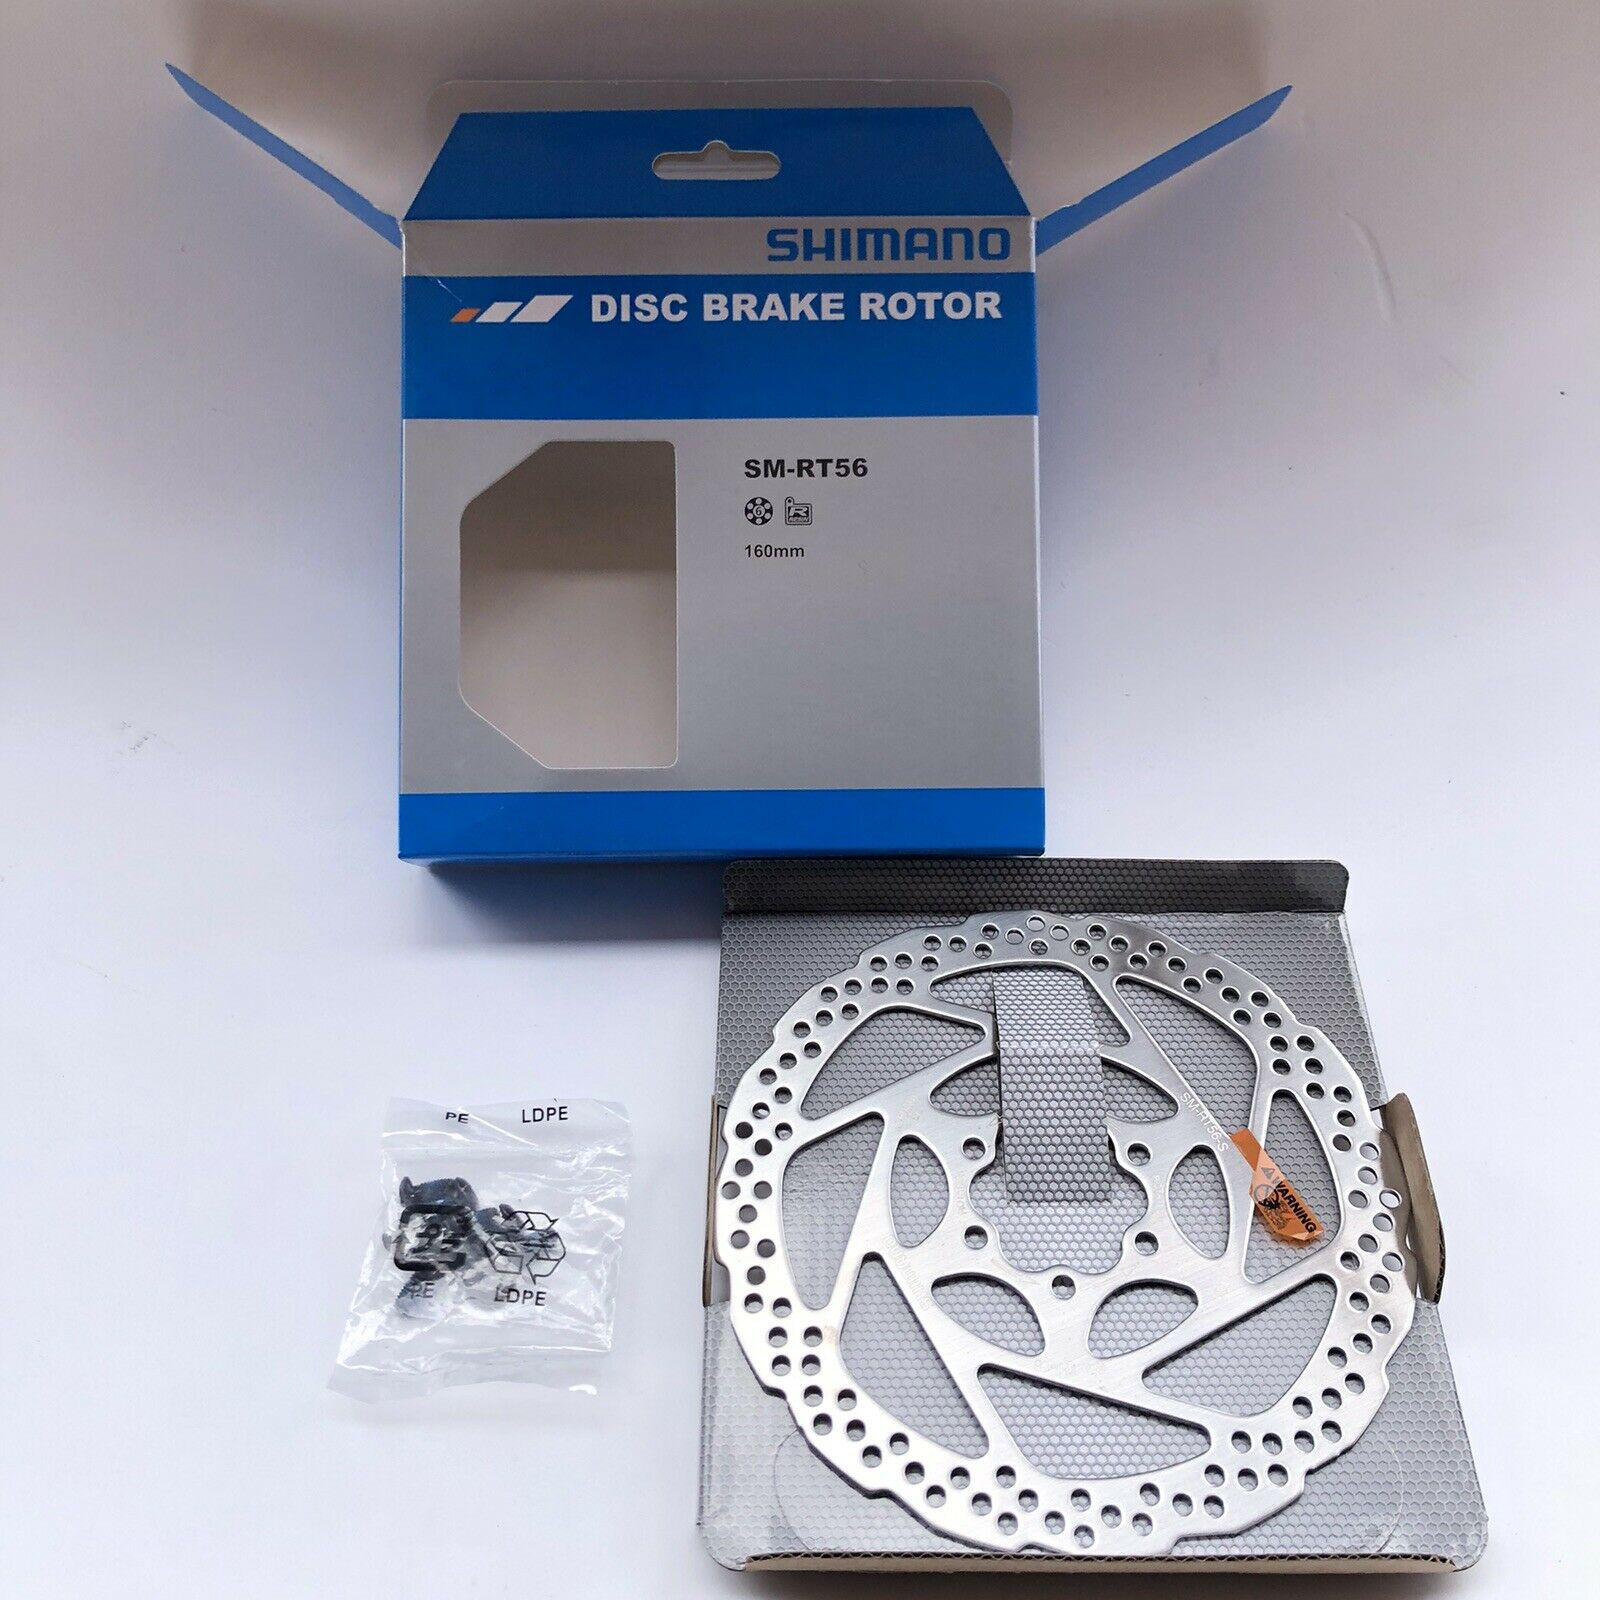 SHIMANO SM-RT56 Disc Brake Rotor Stainless 6-Bolt 6" Inch 160mm Discs Bike Part